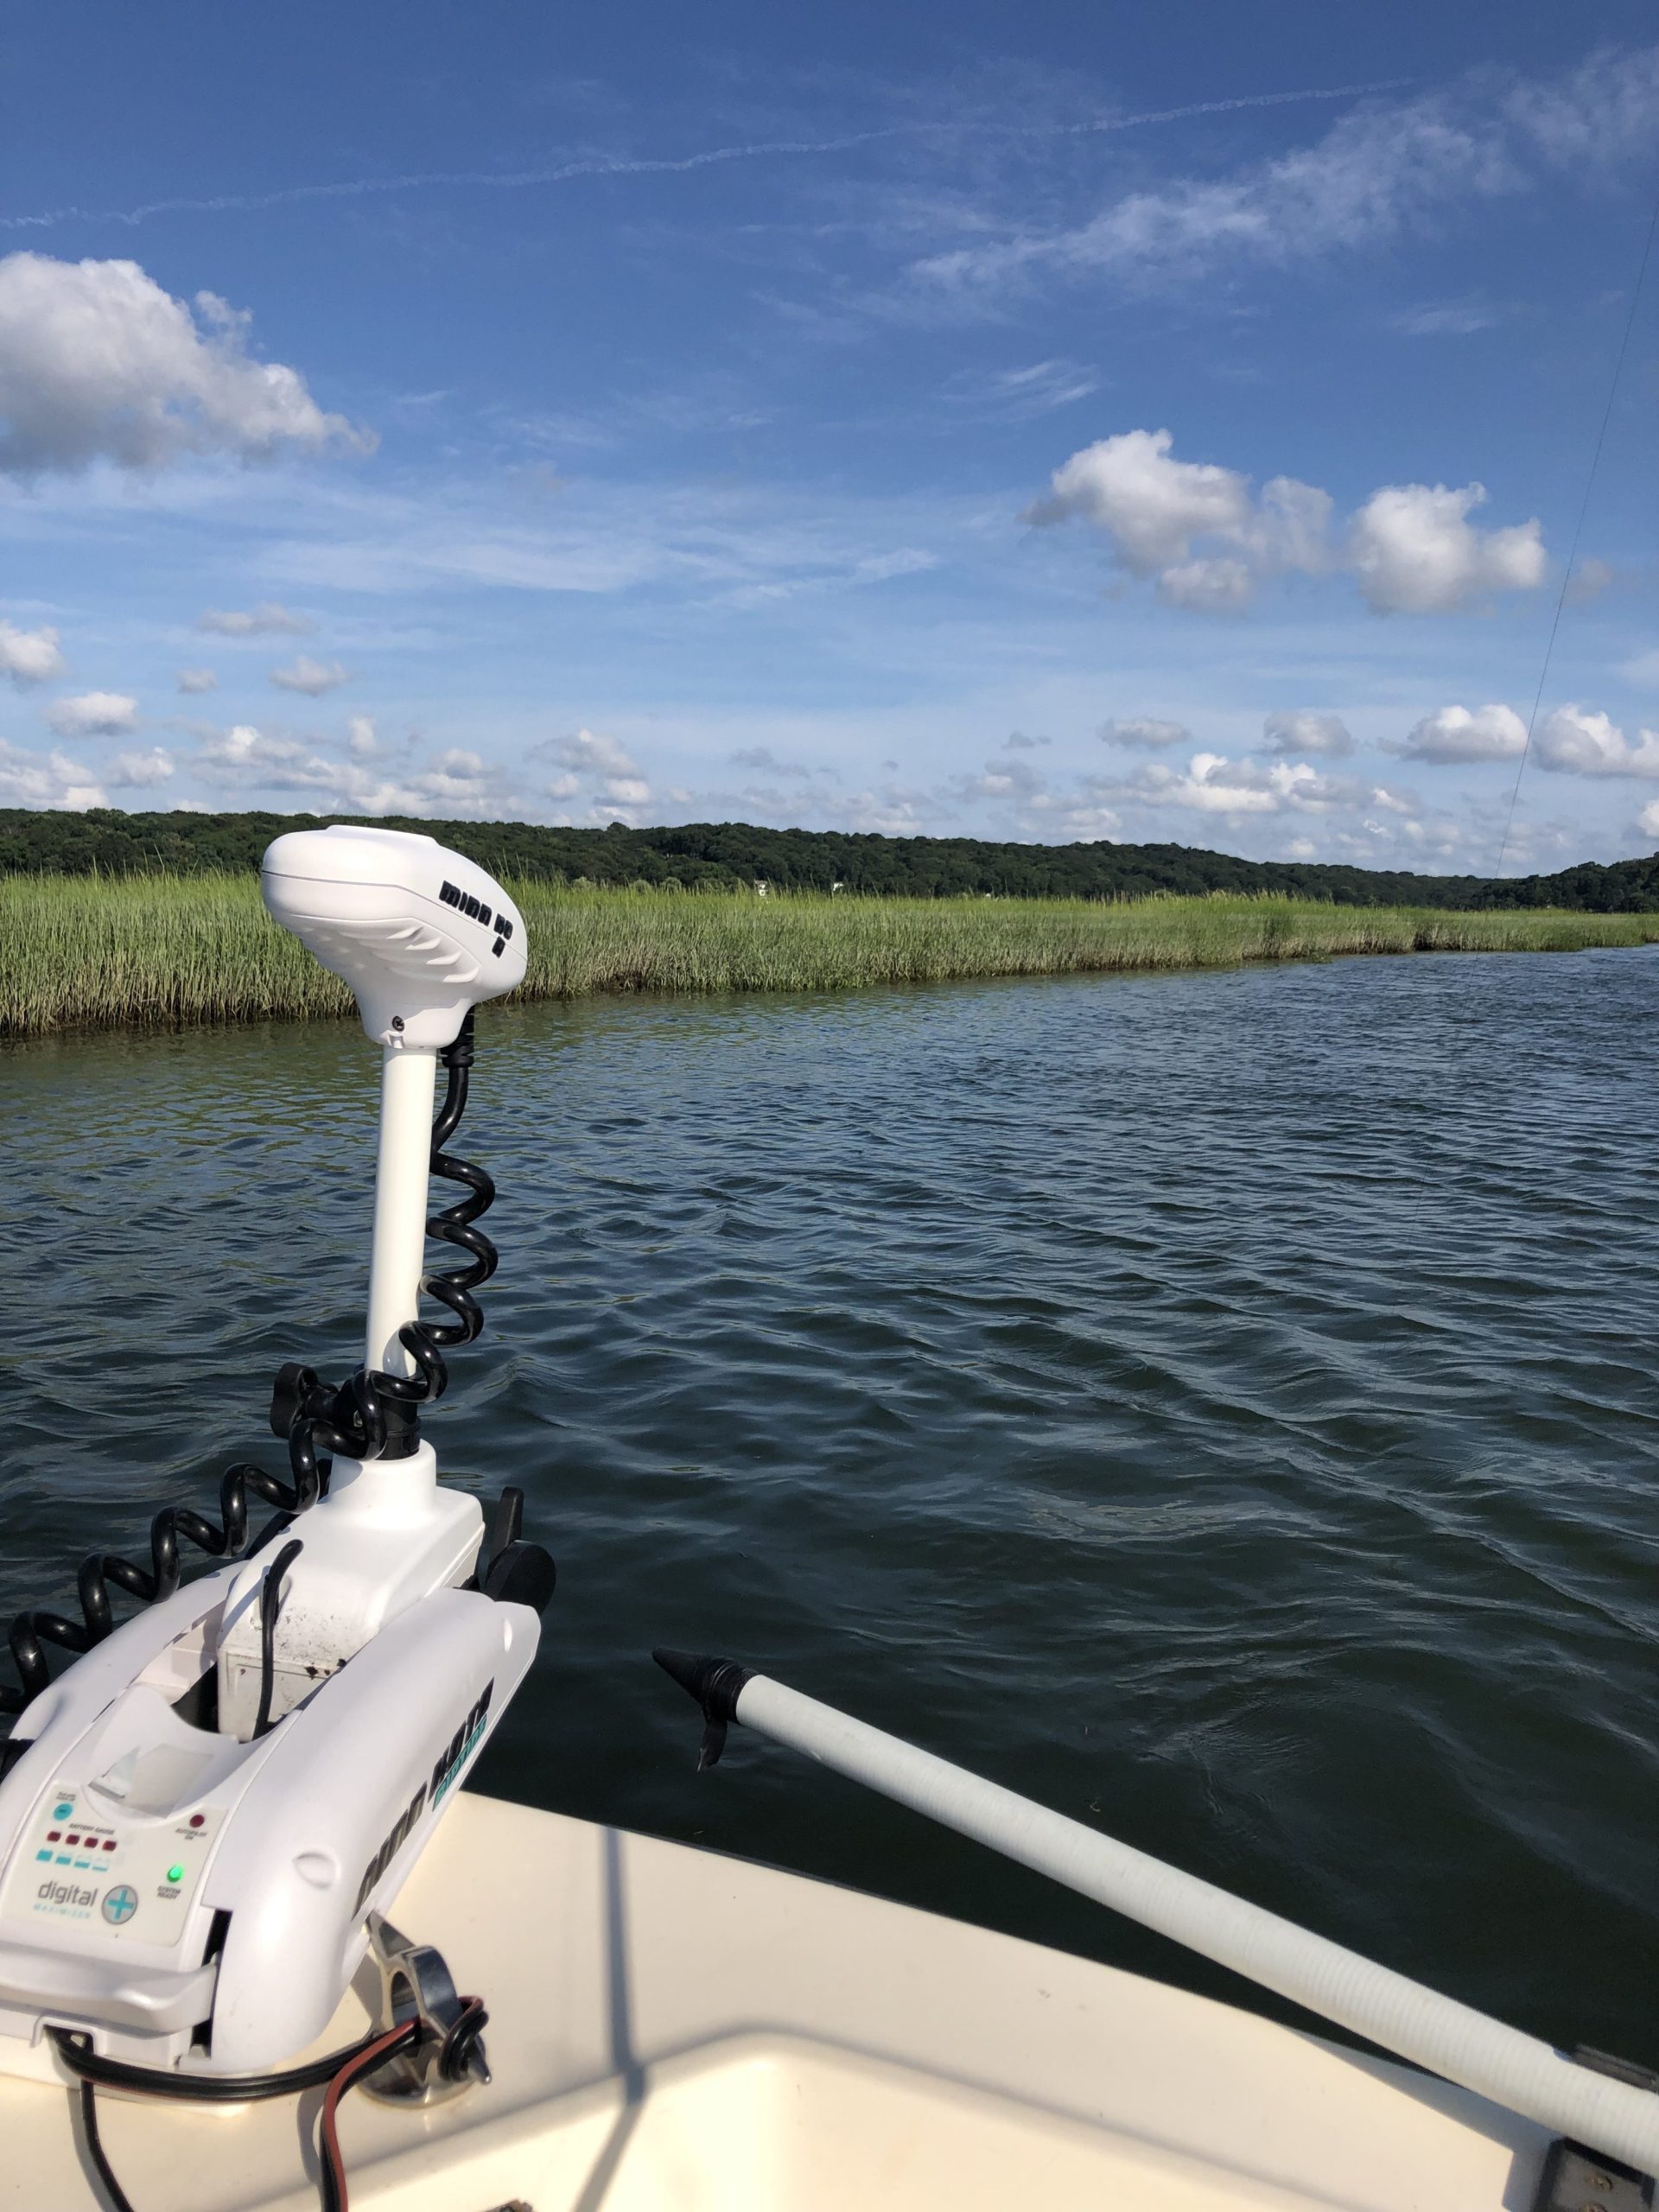 MinnKota Trolling Motors are a must when approaching a Great Fishing Spot,  they provide total control of your boat and maintain a stealth approach.